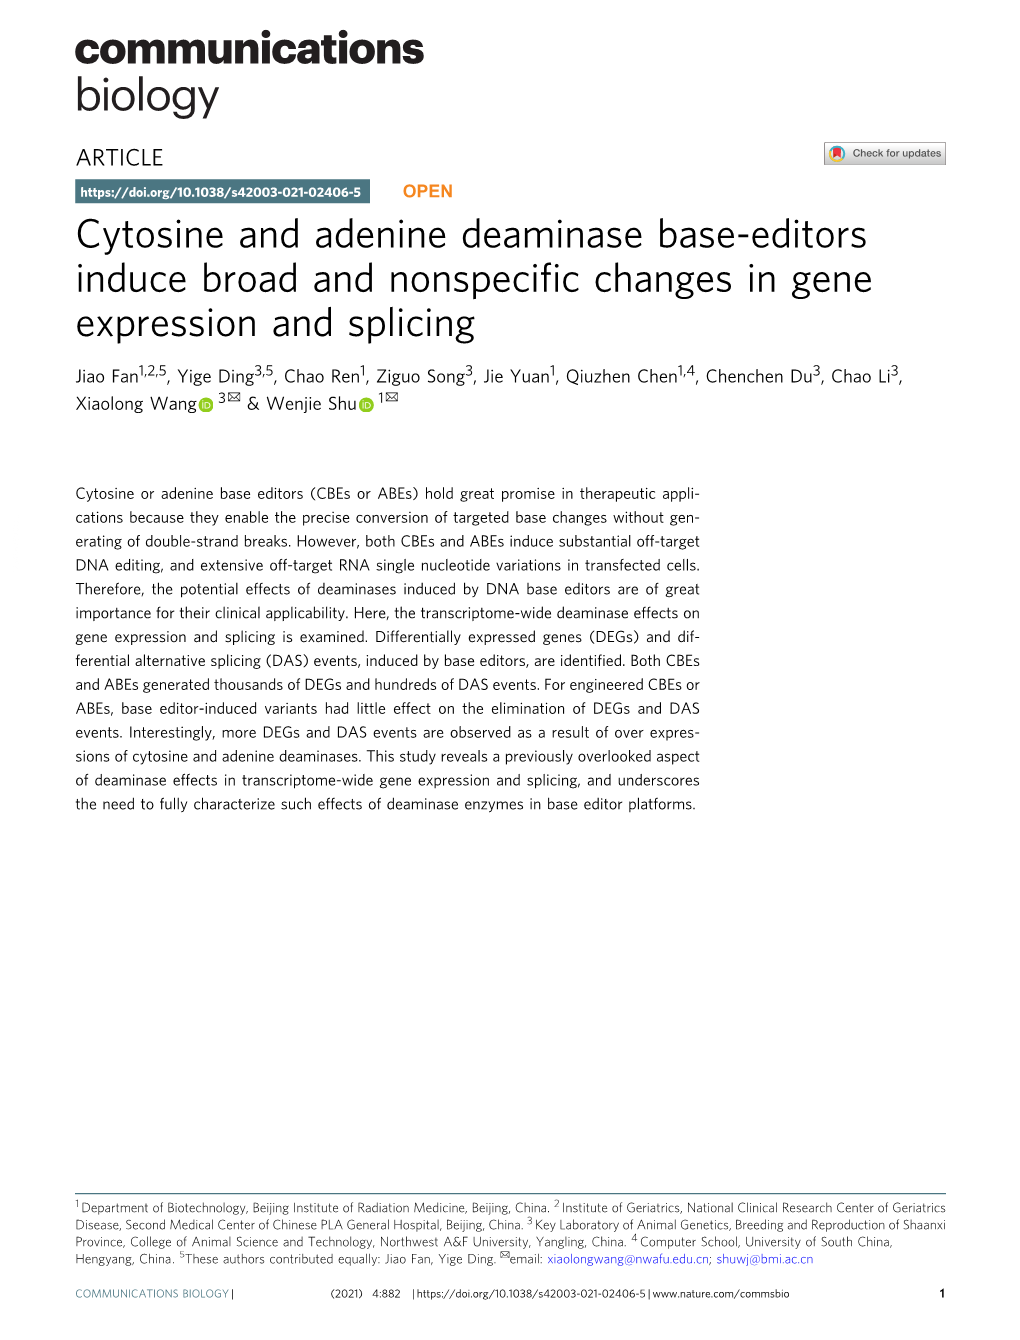 Cytosine and Adenine Deaminase Base-Editors Induce Broad and Nonspeciﬁc Changes in Gene Expression and Splicing